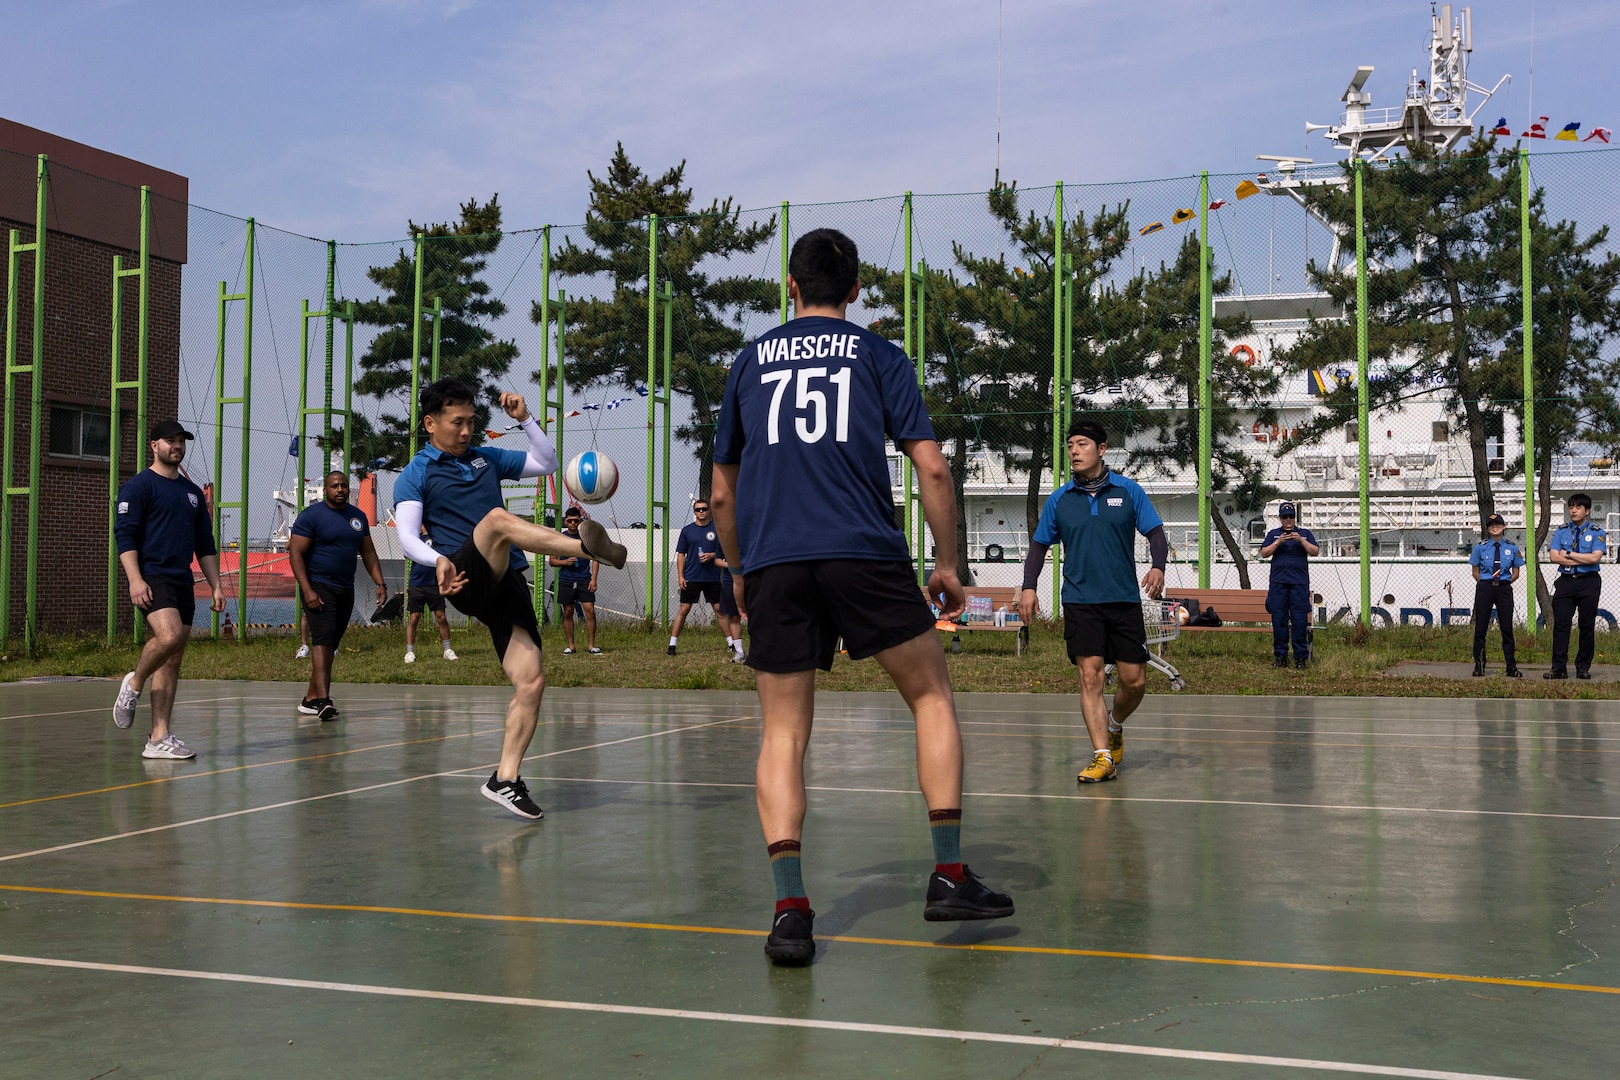 A member of the Republic of Korea Coast Guard kicks the ball during a game of jokgu for a sports day between Korea Coast Guardsmen and U.S. Coast Guardsmen assigned to the U.S. Coast Guard Cutter Waesche (WMSL-751), in Pohang, Republic of Korea, June 10, 2024. United States and Korea Coast Guardsmen came together to play jokgu to build stronger relationship and cooperation between the servicemembers of each nation. Waesche is the second U.S. Coast Guard National Security Cutter deployed to the Indo-Pacific in 2024. Coast Guard cutters routinely deploy to the region to engage with partner nations to ensure a free and open Indo-Pacific. (U.S. Marine Corps photo by Cpl. Elijah Murphy)